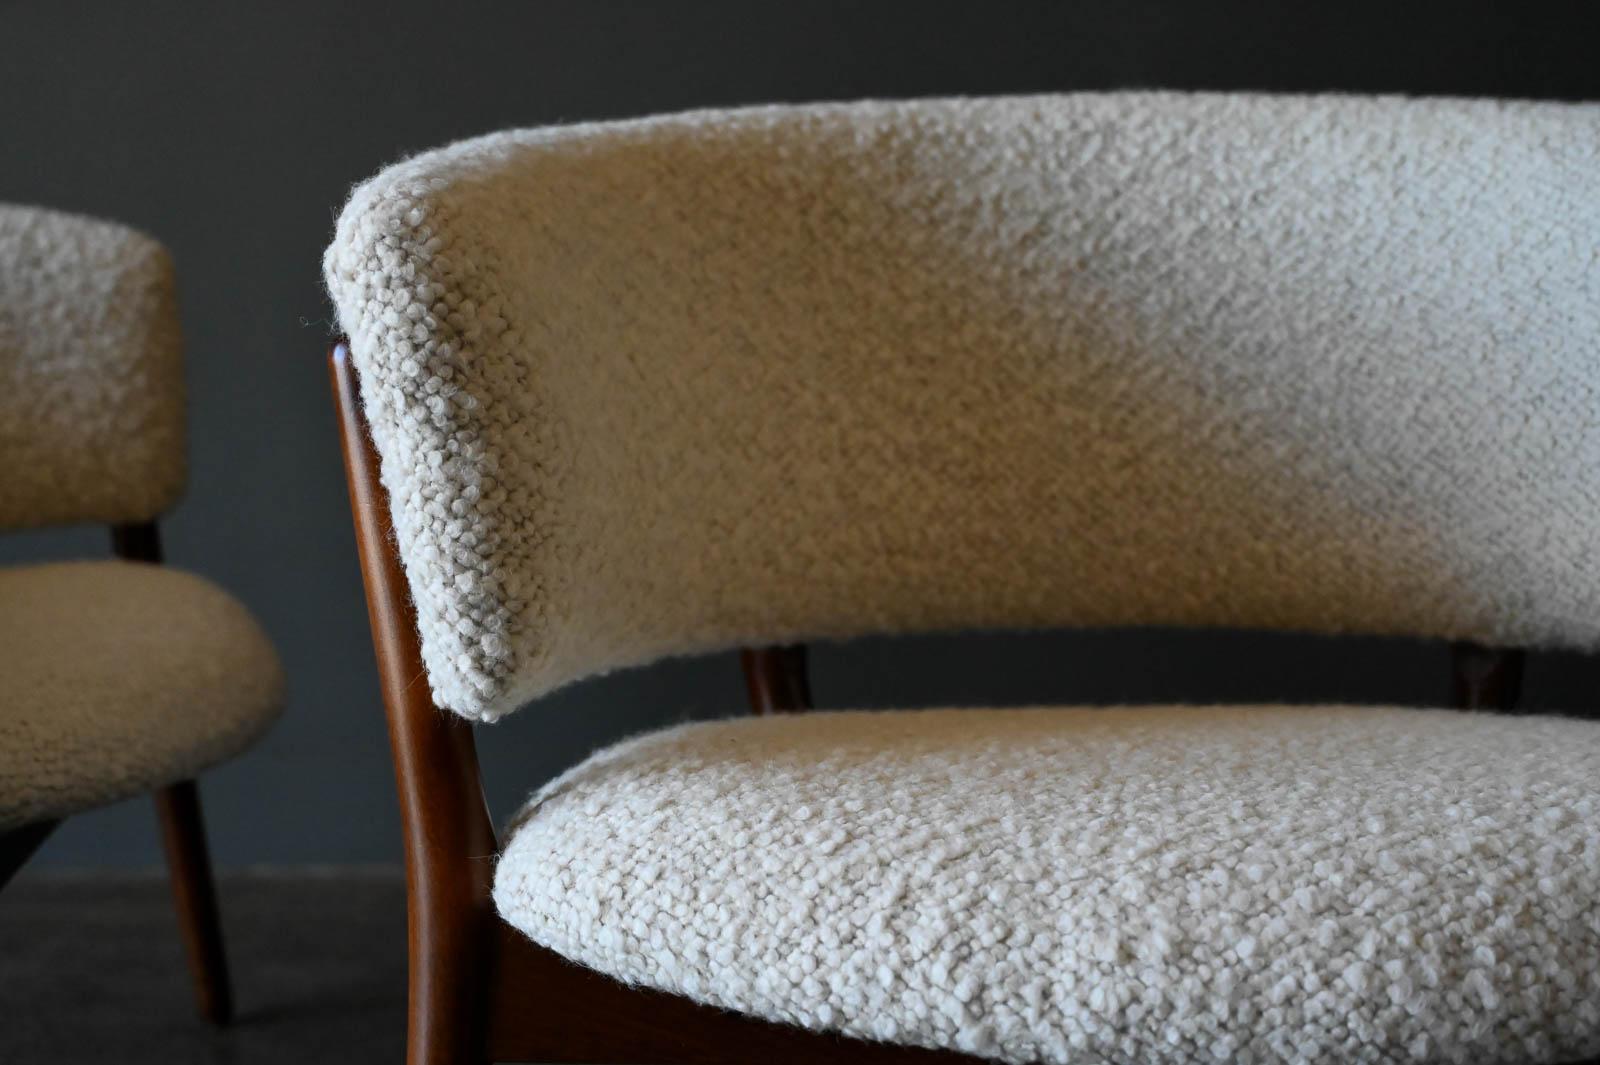 Pair of Nanna Ditzel Model 83 Lounge Chairs in Pierre Frey Wool Bouclé, 1952 For Sale 3